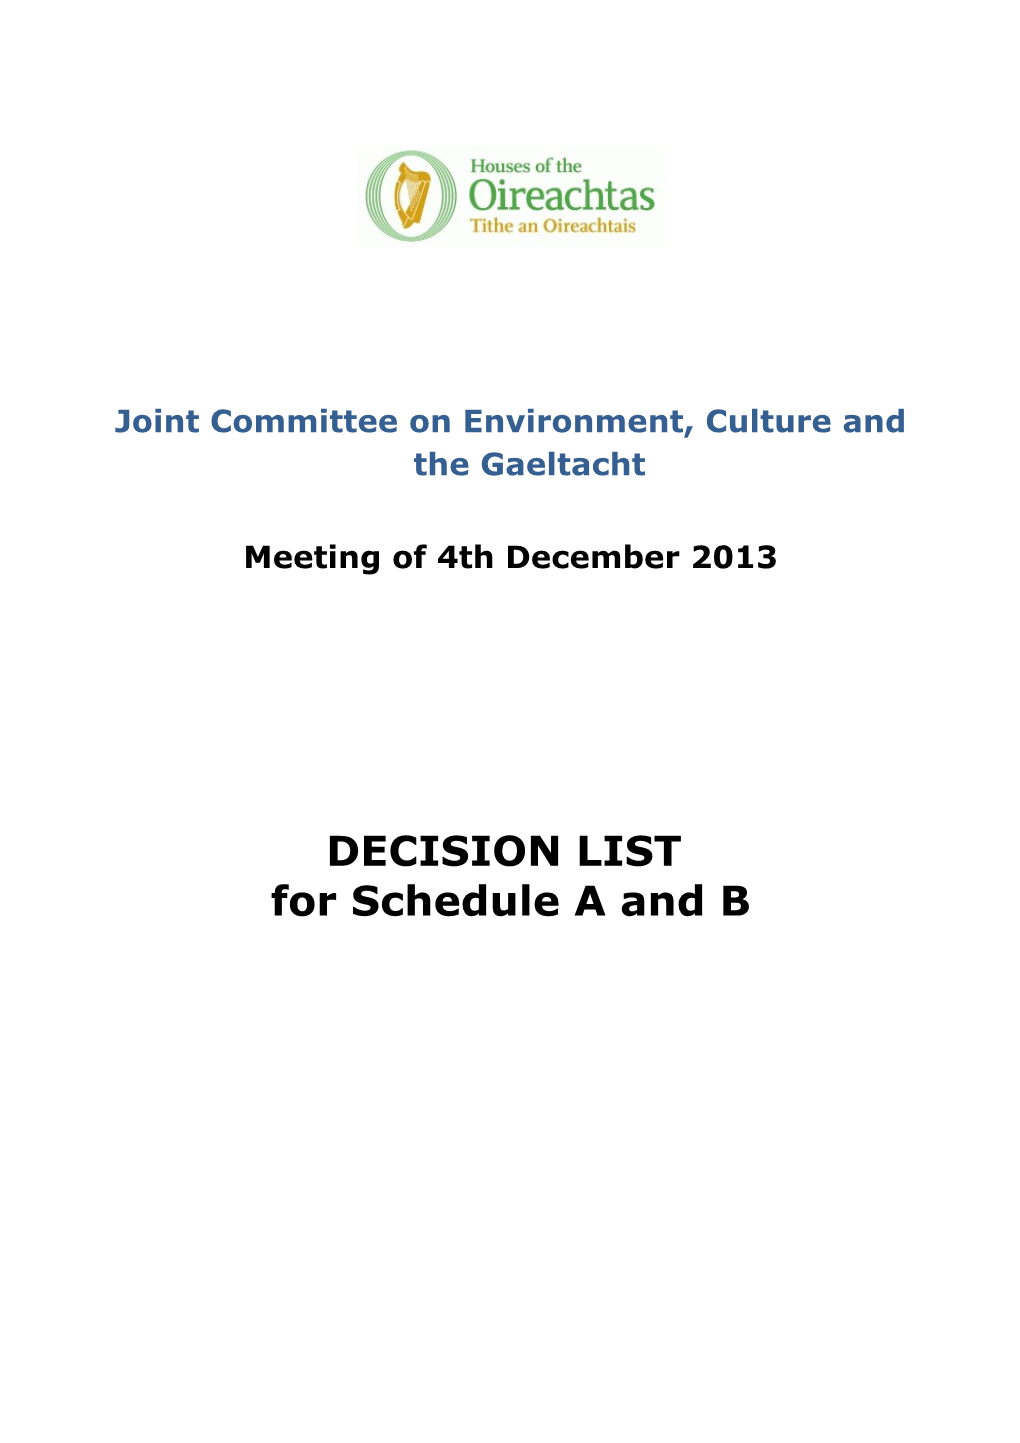 Joint Committee on Environment, Culture and the Gaeltacht